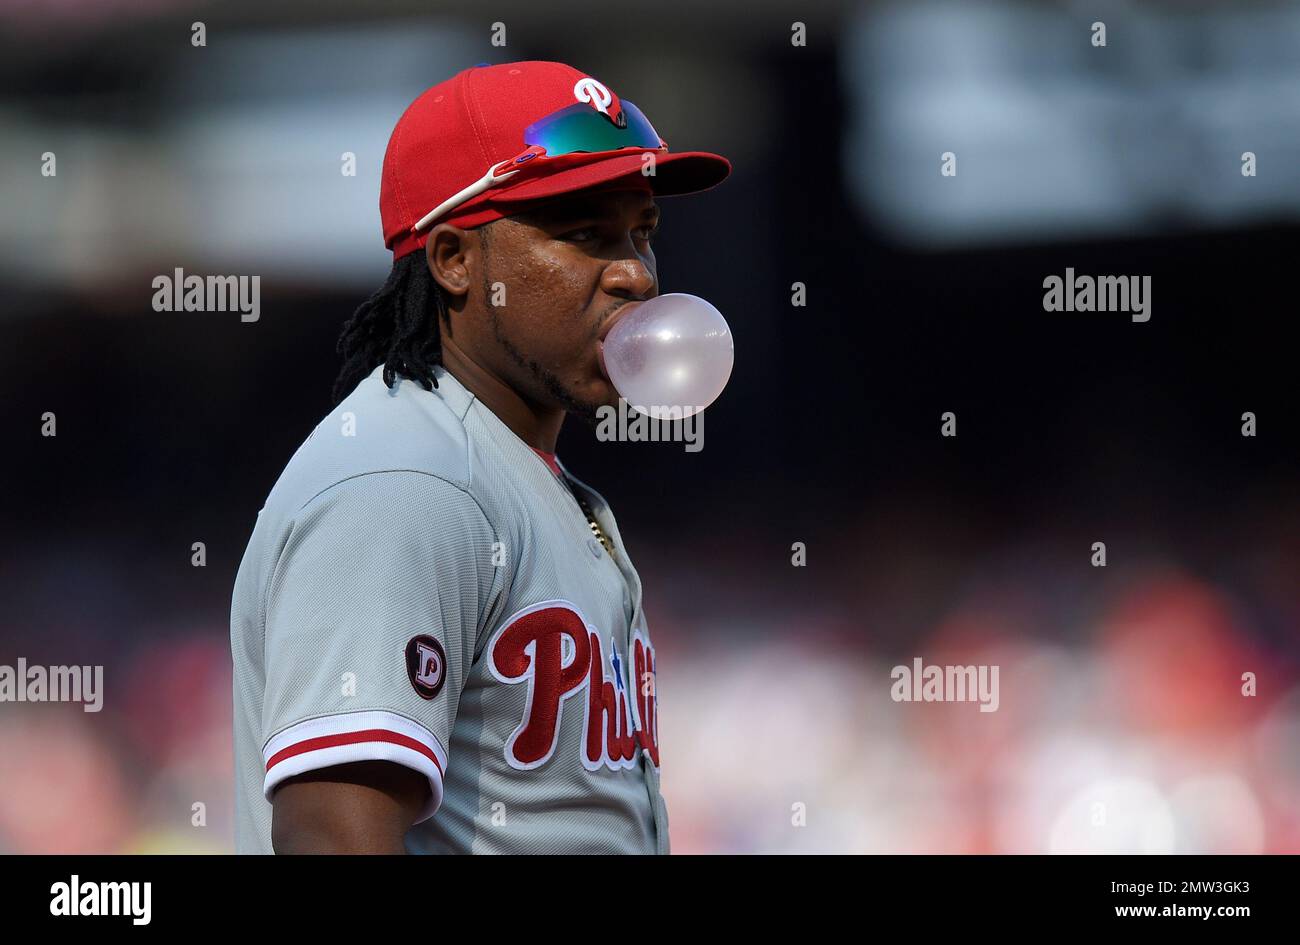 Philadelphia Phillies third baseman Maikel Franco blows a bubble during the second inning of a baseball game against the Washington Nationals, Friday, April 14, 2017, in Washington. (AP Photo/Nick Wass) Stock Photo